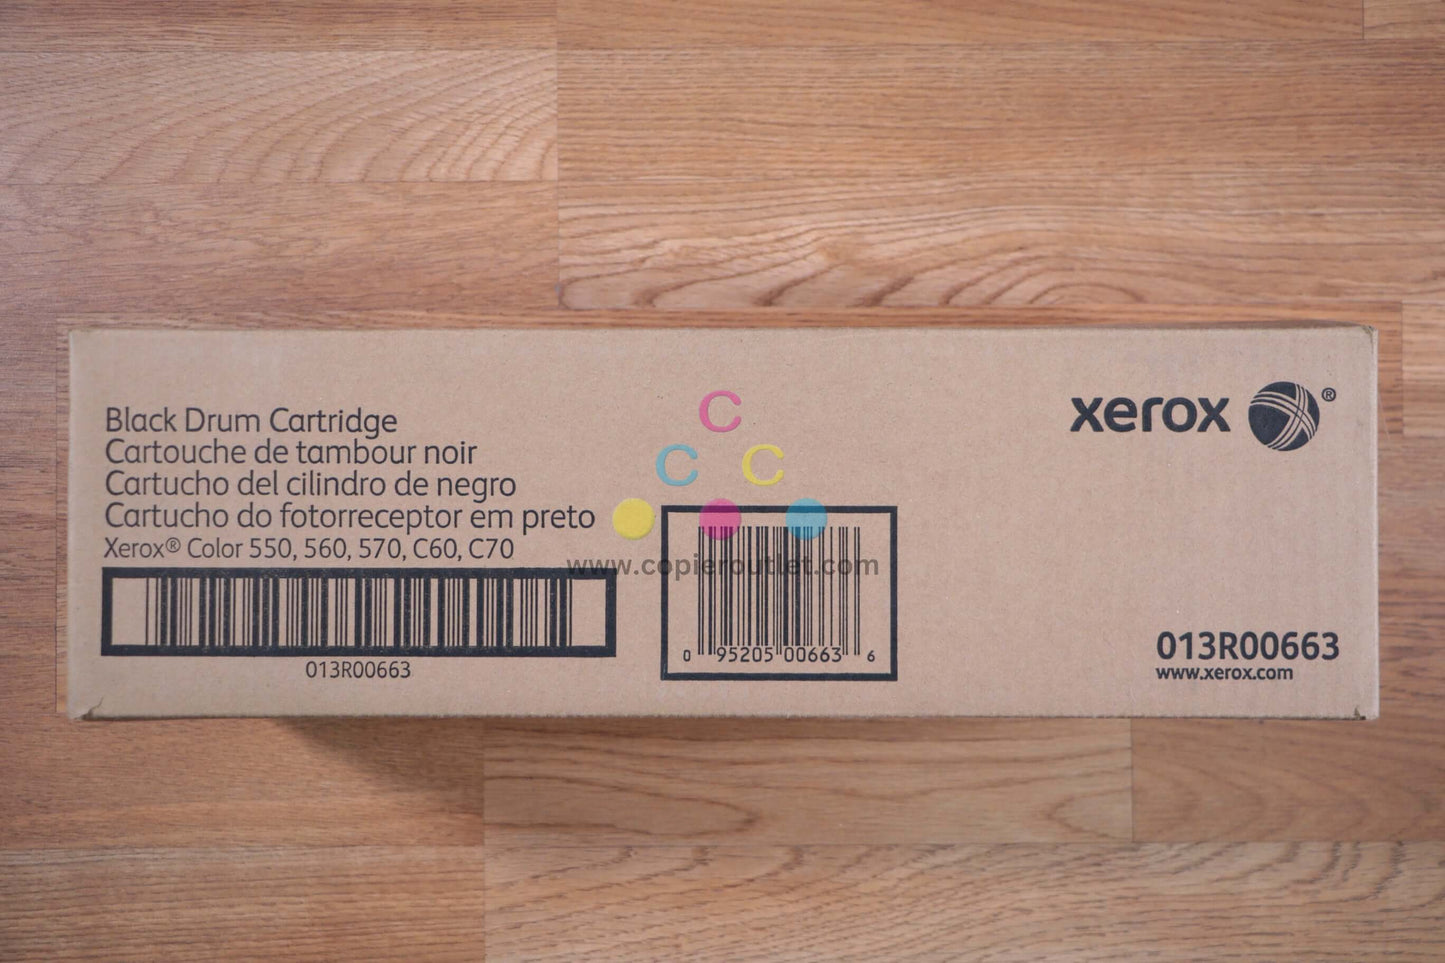 Xerox Black Drum Cartridge 013R00663 Color 550 560 570 C60 C70 Same Day Shipping - copier-clearance-center